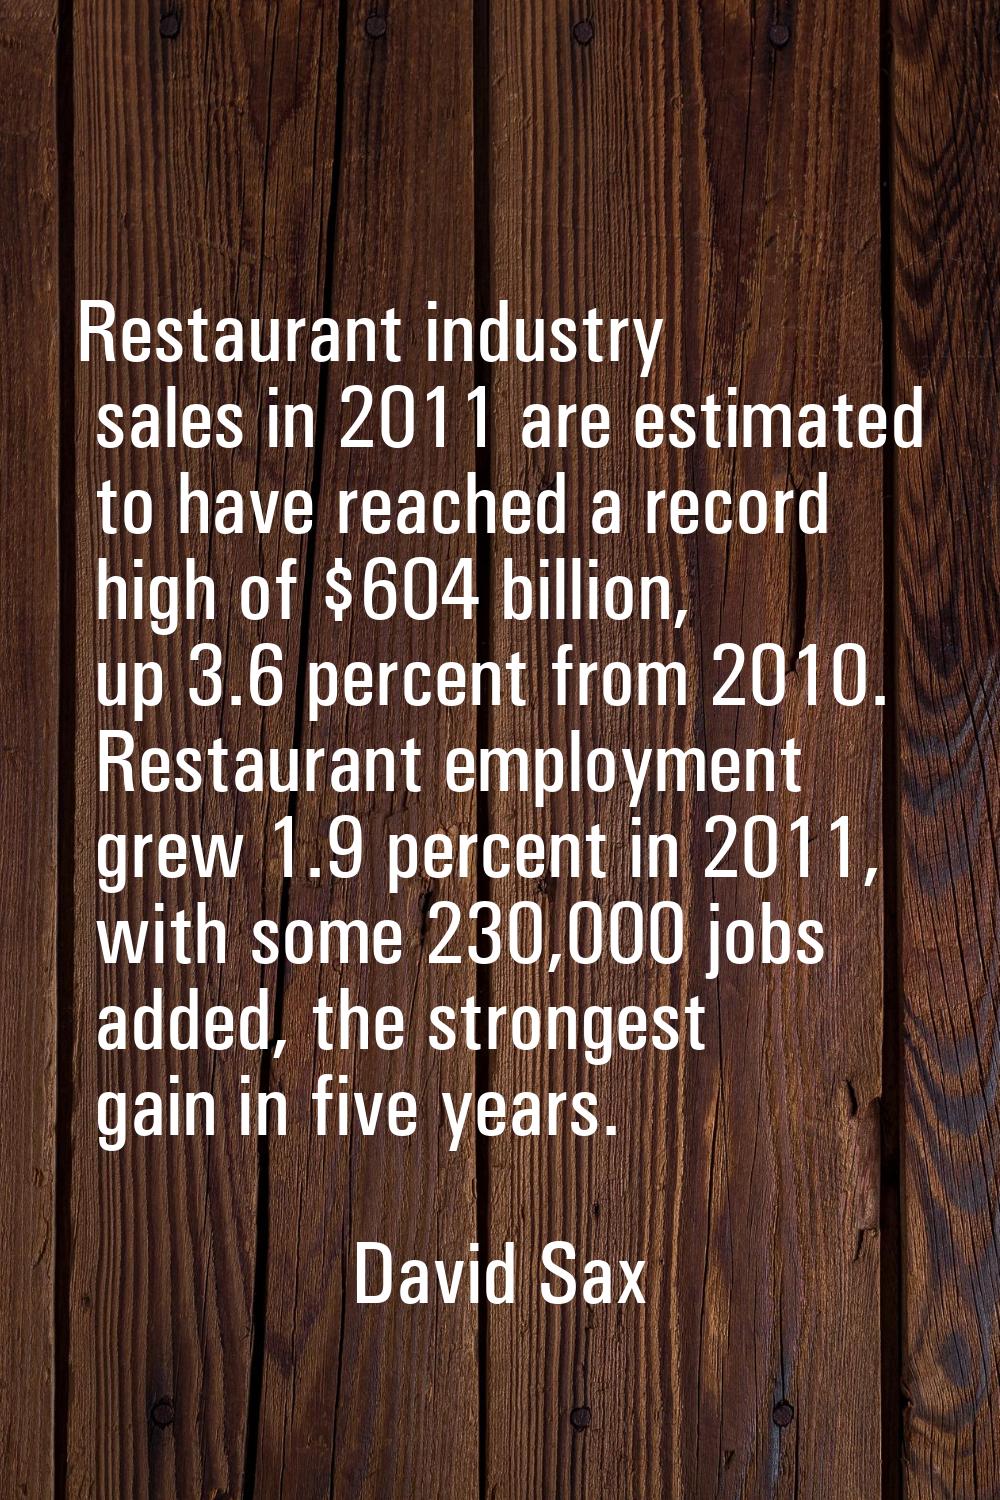 Restaurant industry sales in 2011 are estimated to have reached a record high of $604 billion, up 3